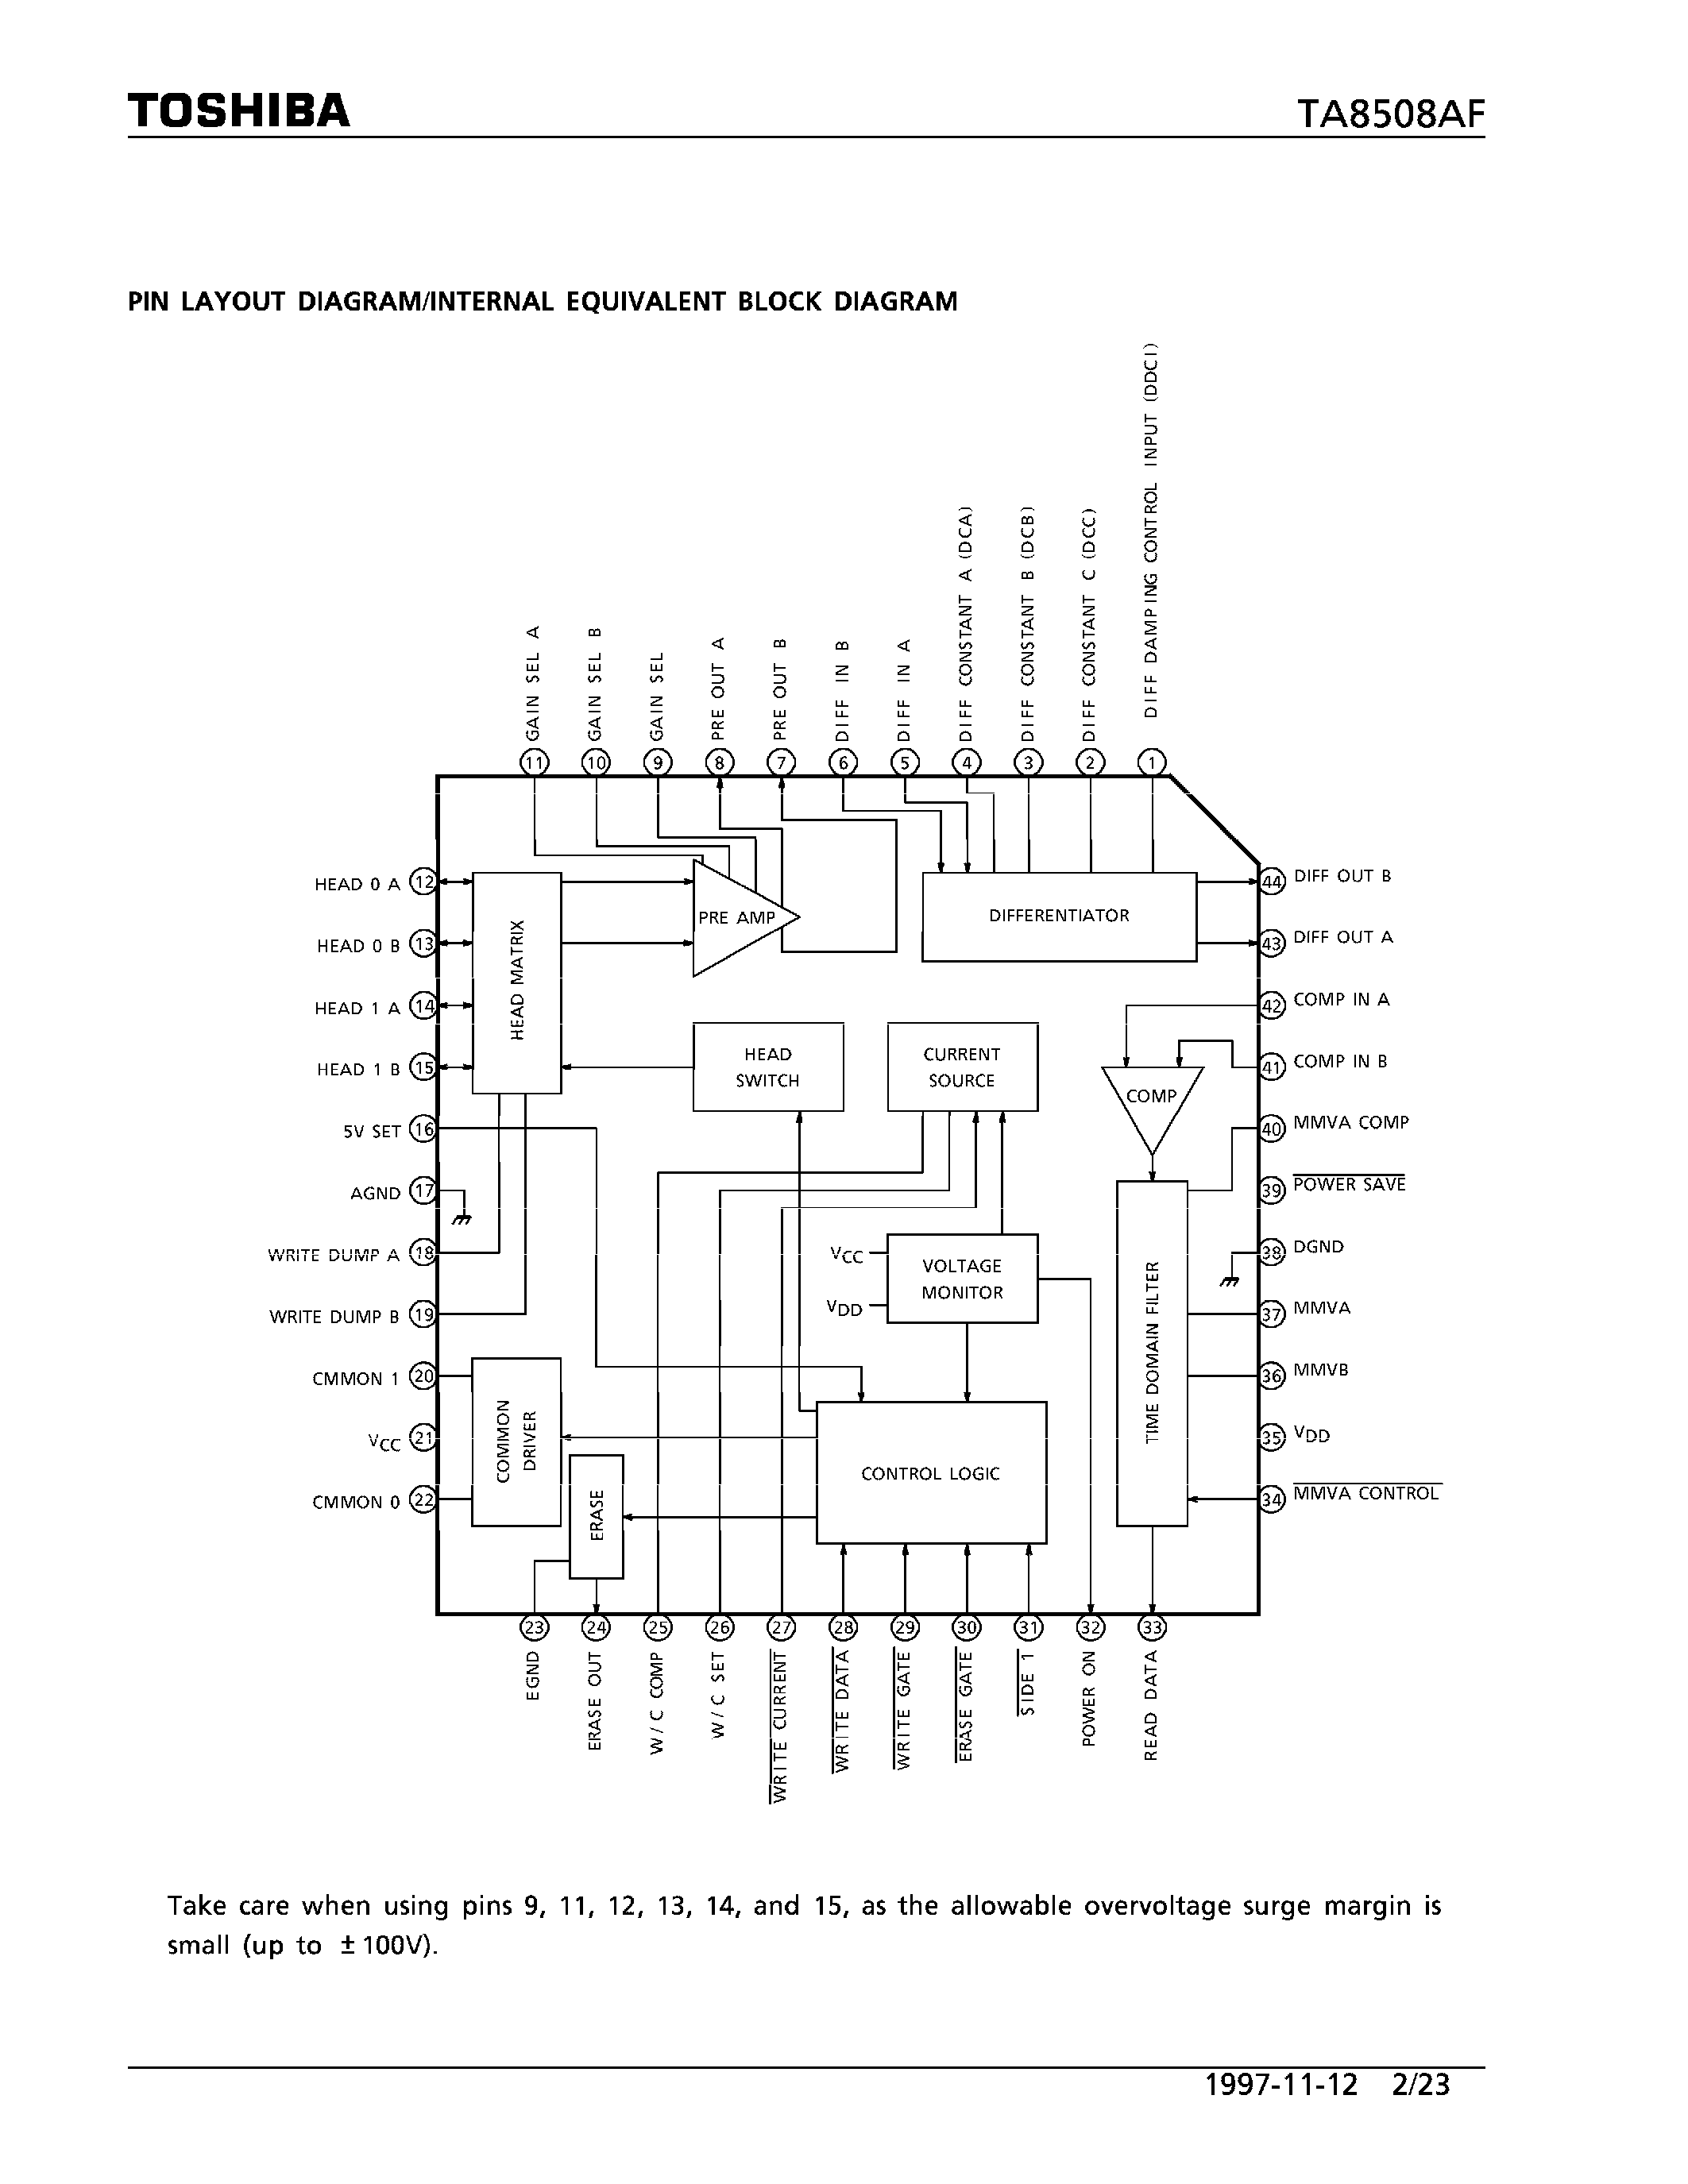 Datasheet TA8508AF - R/W IC FOR FLOPPY DISK DRIVE page 2